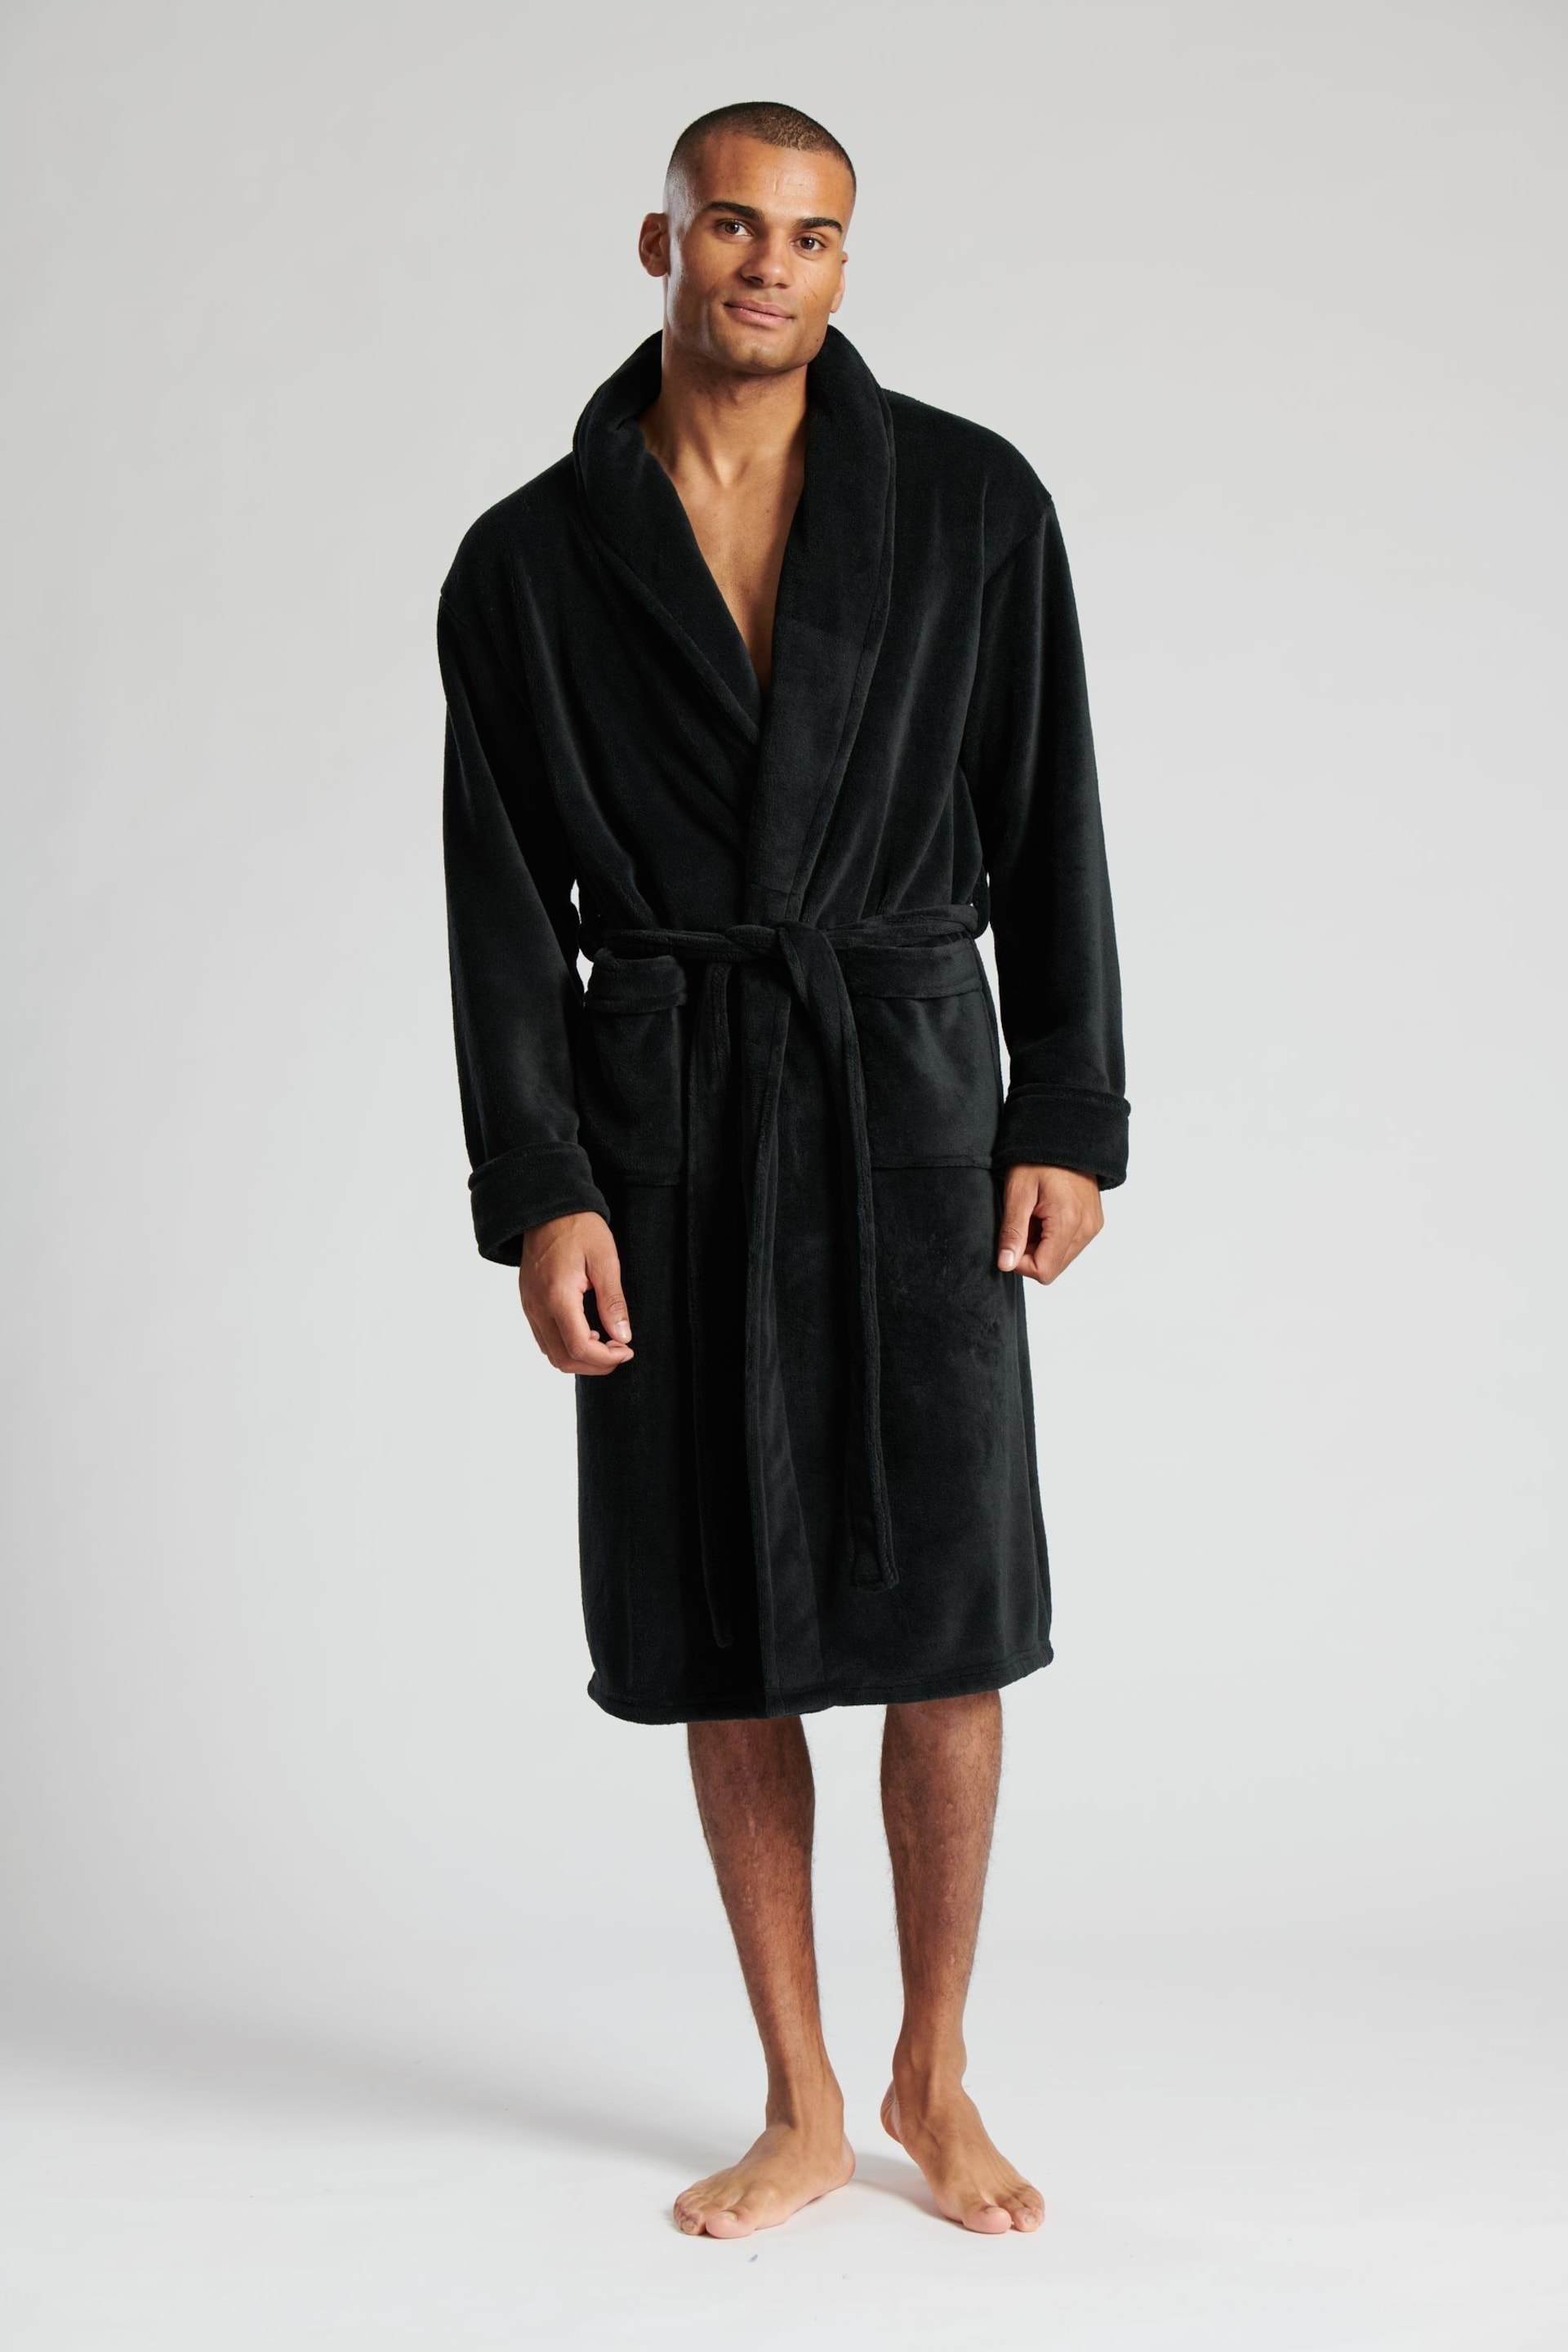 Loungeable Black SuperSoft Fleece Dressing Gown - Image 1 of 5